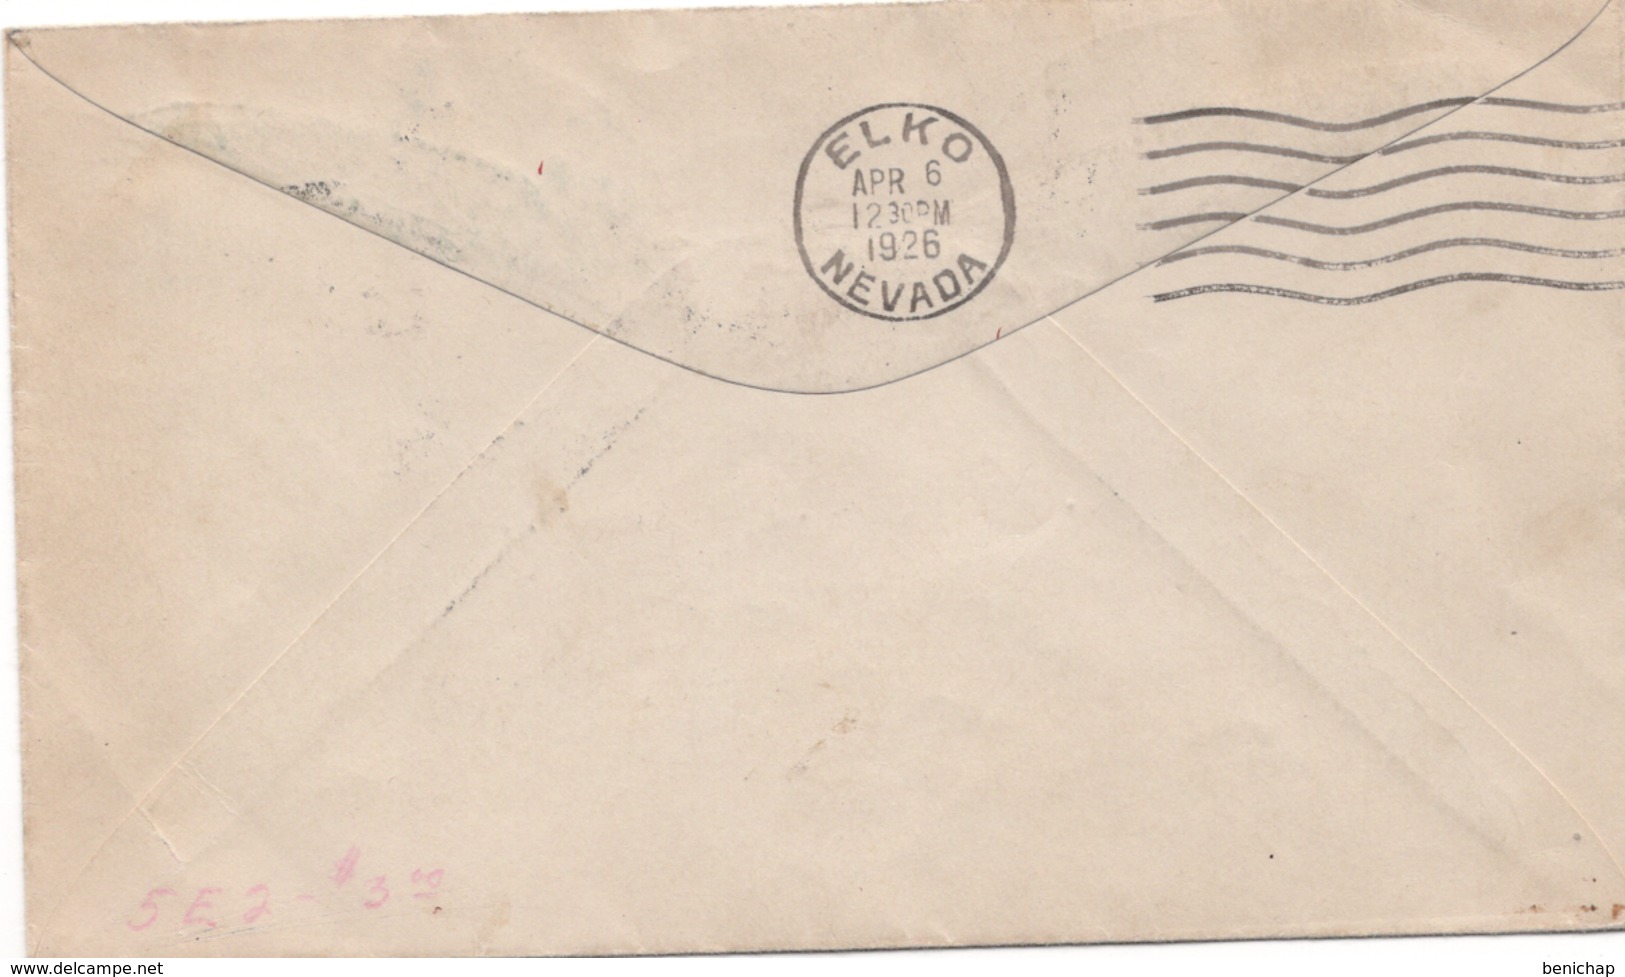 (R66) Scott C7 - Map Of USA And 2 Mail Plaines - Contract Air Mail - Elko - Nevada- Washington - Idaho - Oregon -1926. - 1c. 1918-1940 Covers